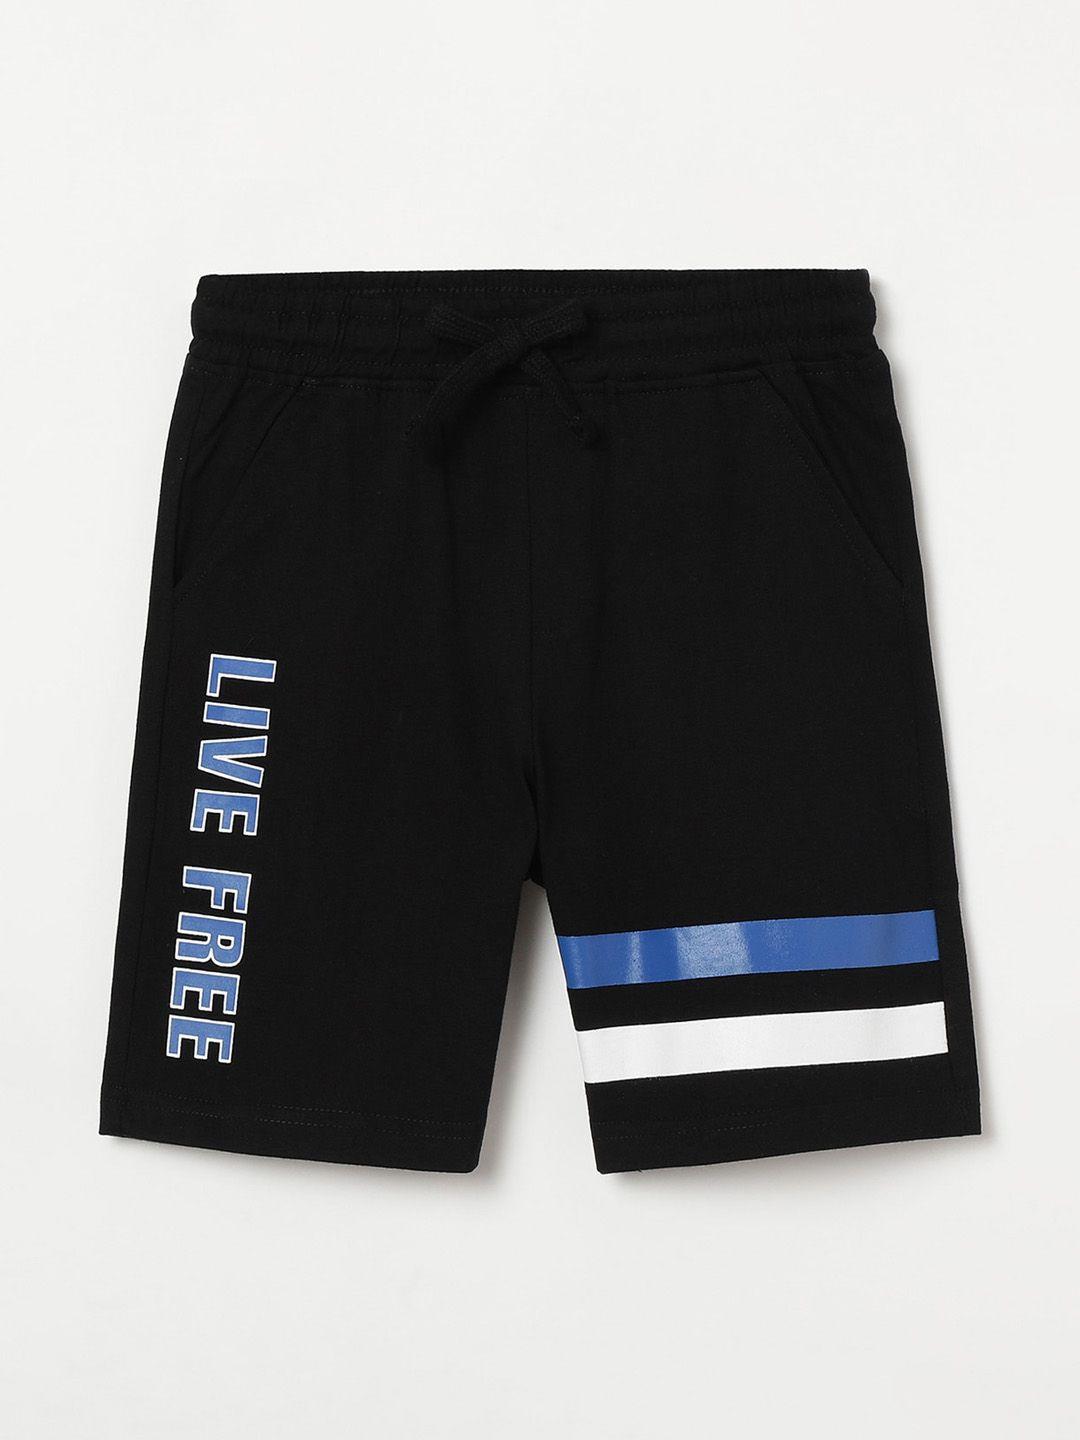 fame-forever-by-lifestyle-boys-typography-printed-pure-cotton-shorts